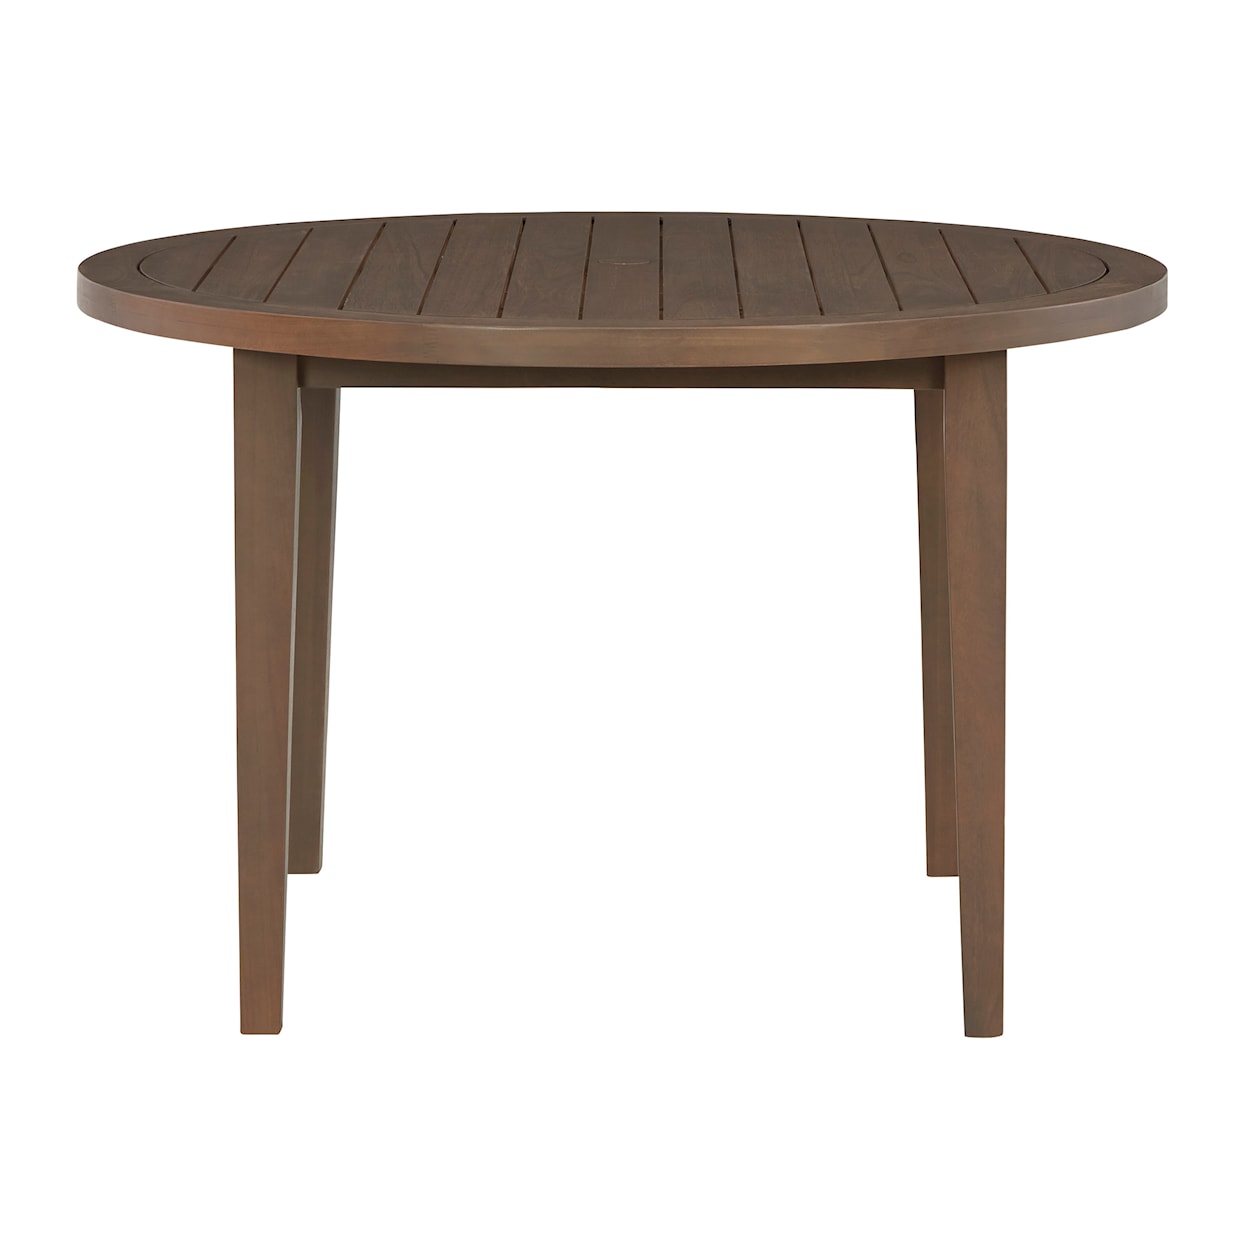 Signature Design by Ashley Germalia Outdoor Dining Table